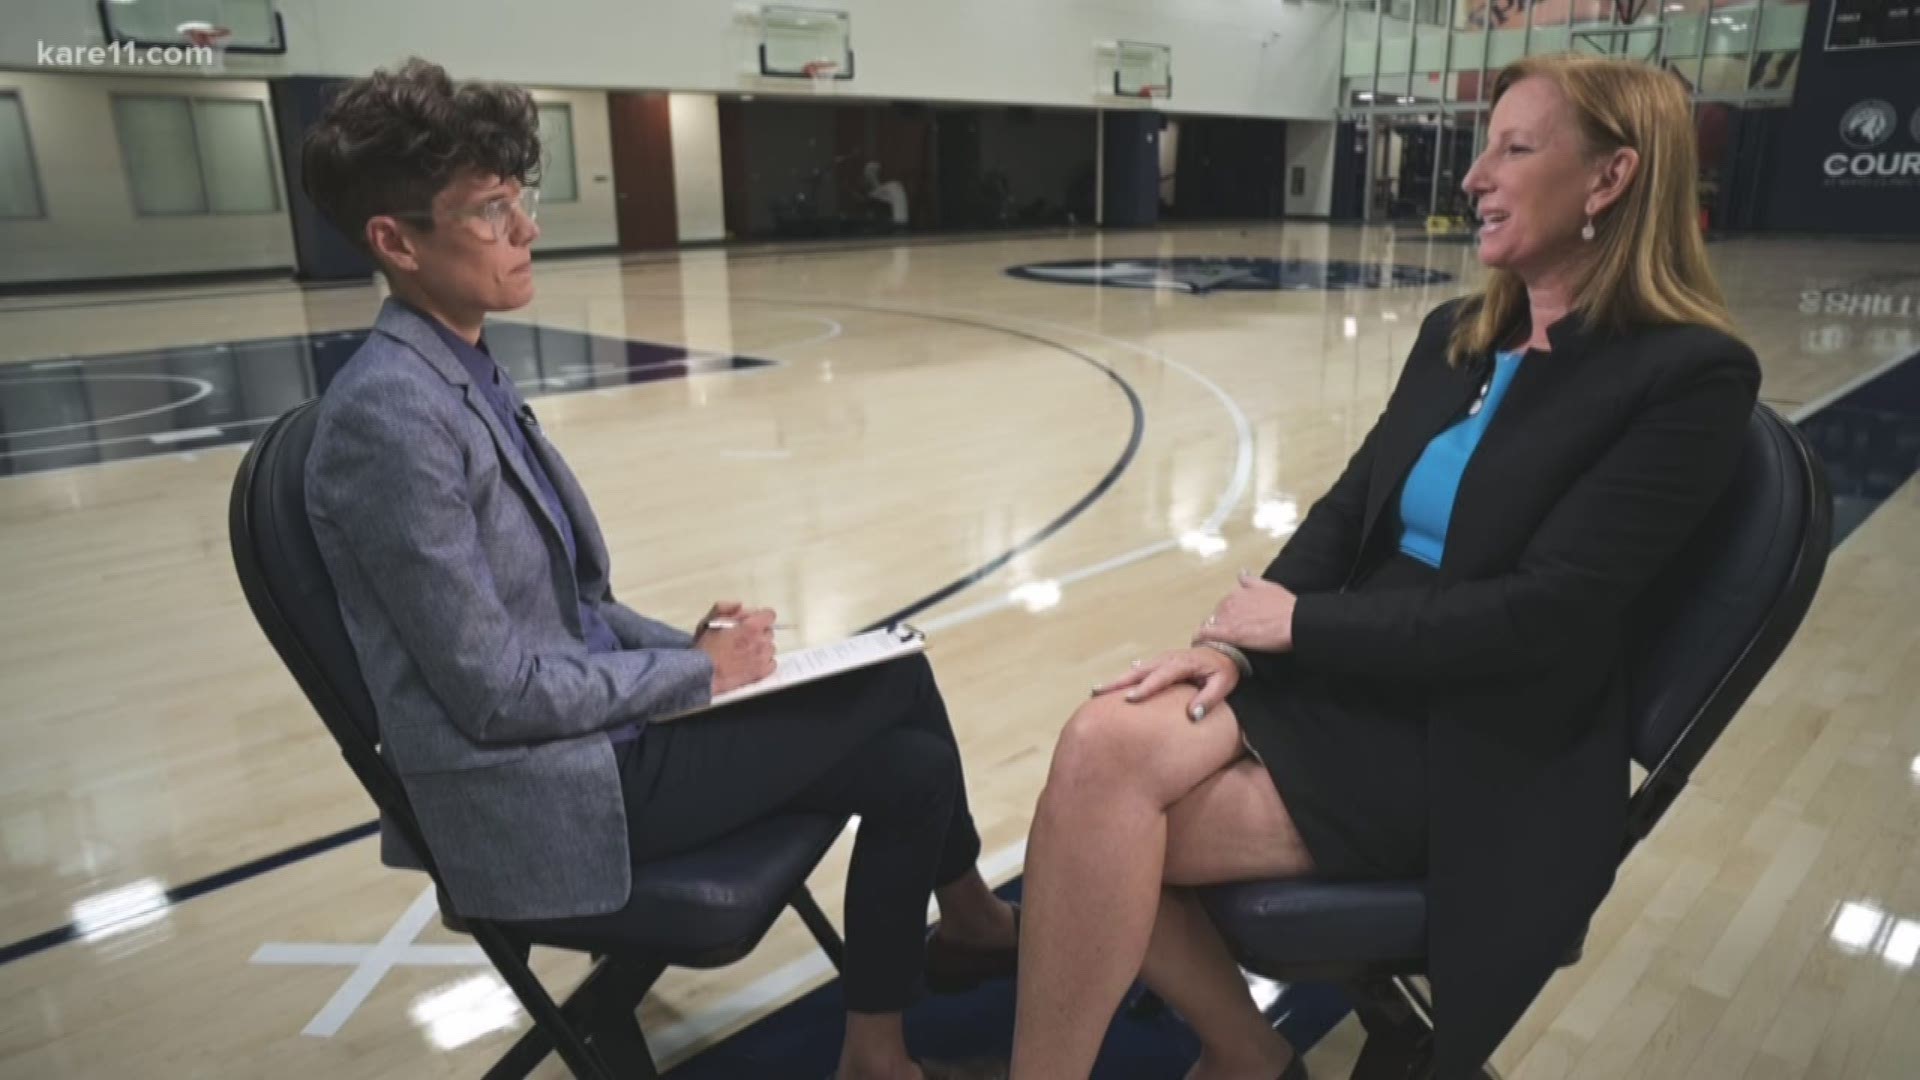 The WNBA has a brand new boss, Cathy Englebert, and her background is impressive. Jana Shortal talked with her in an exclusive interview.